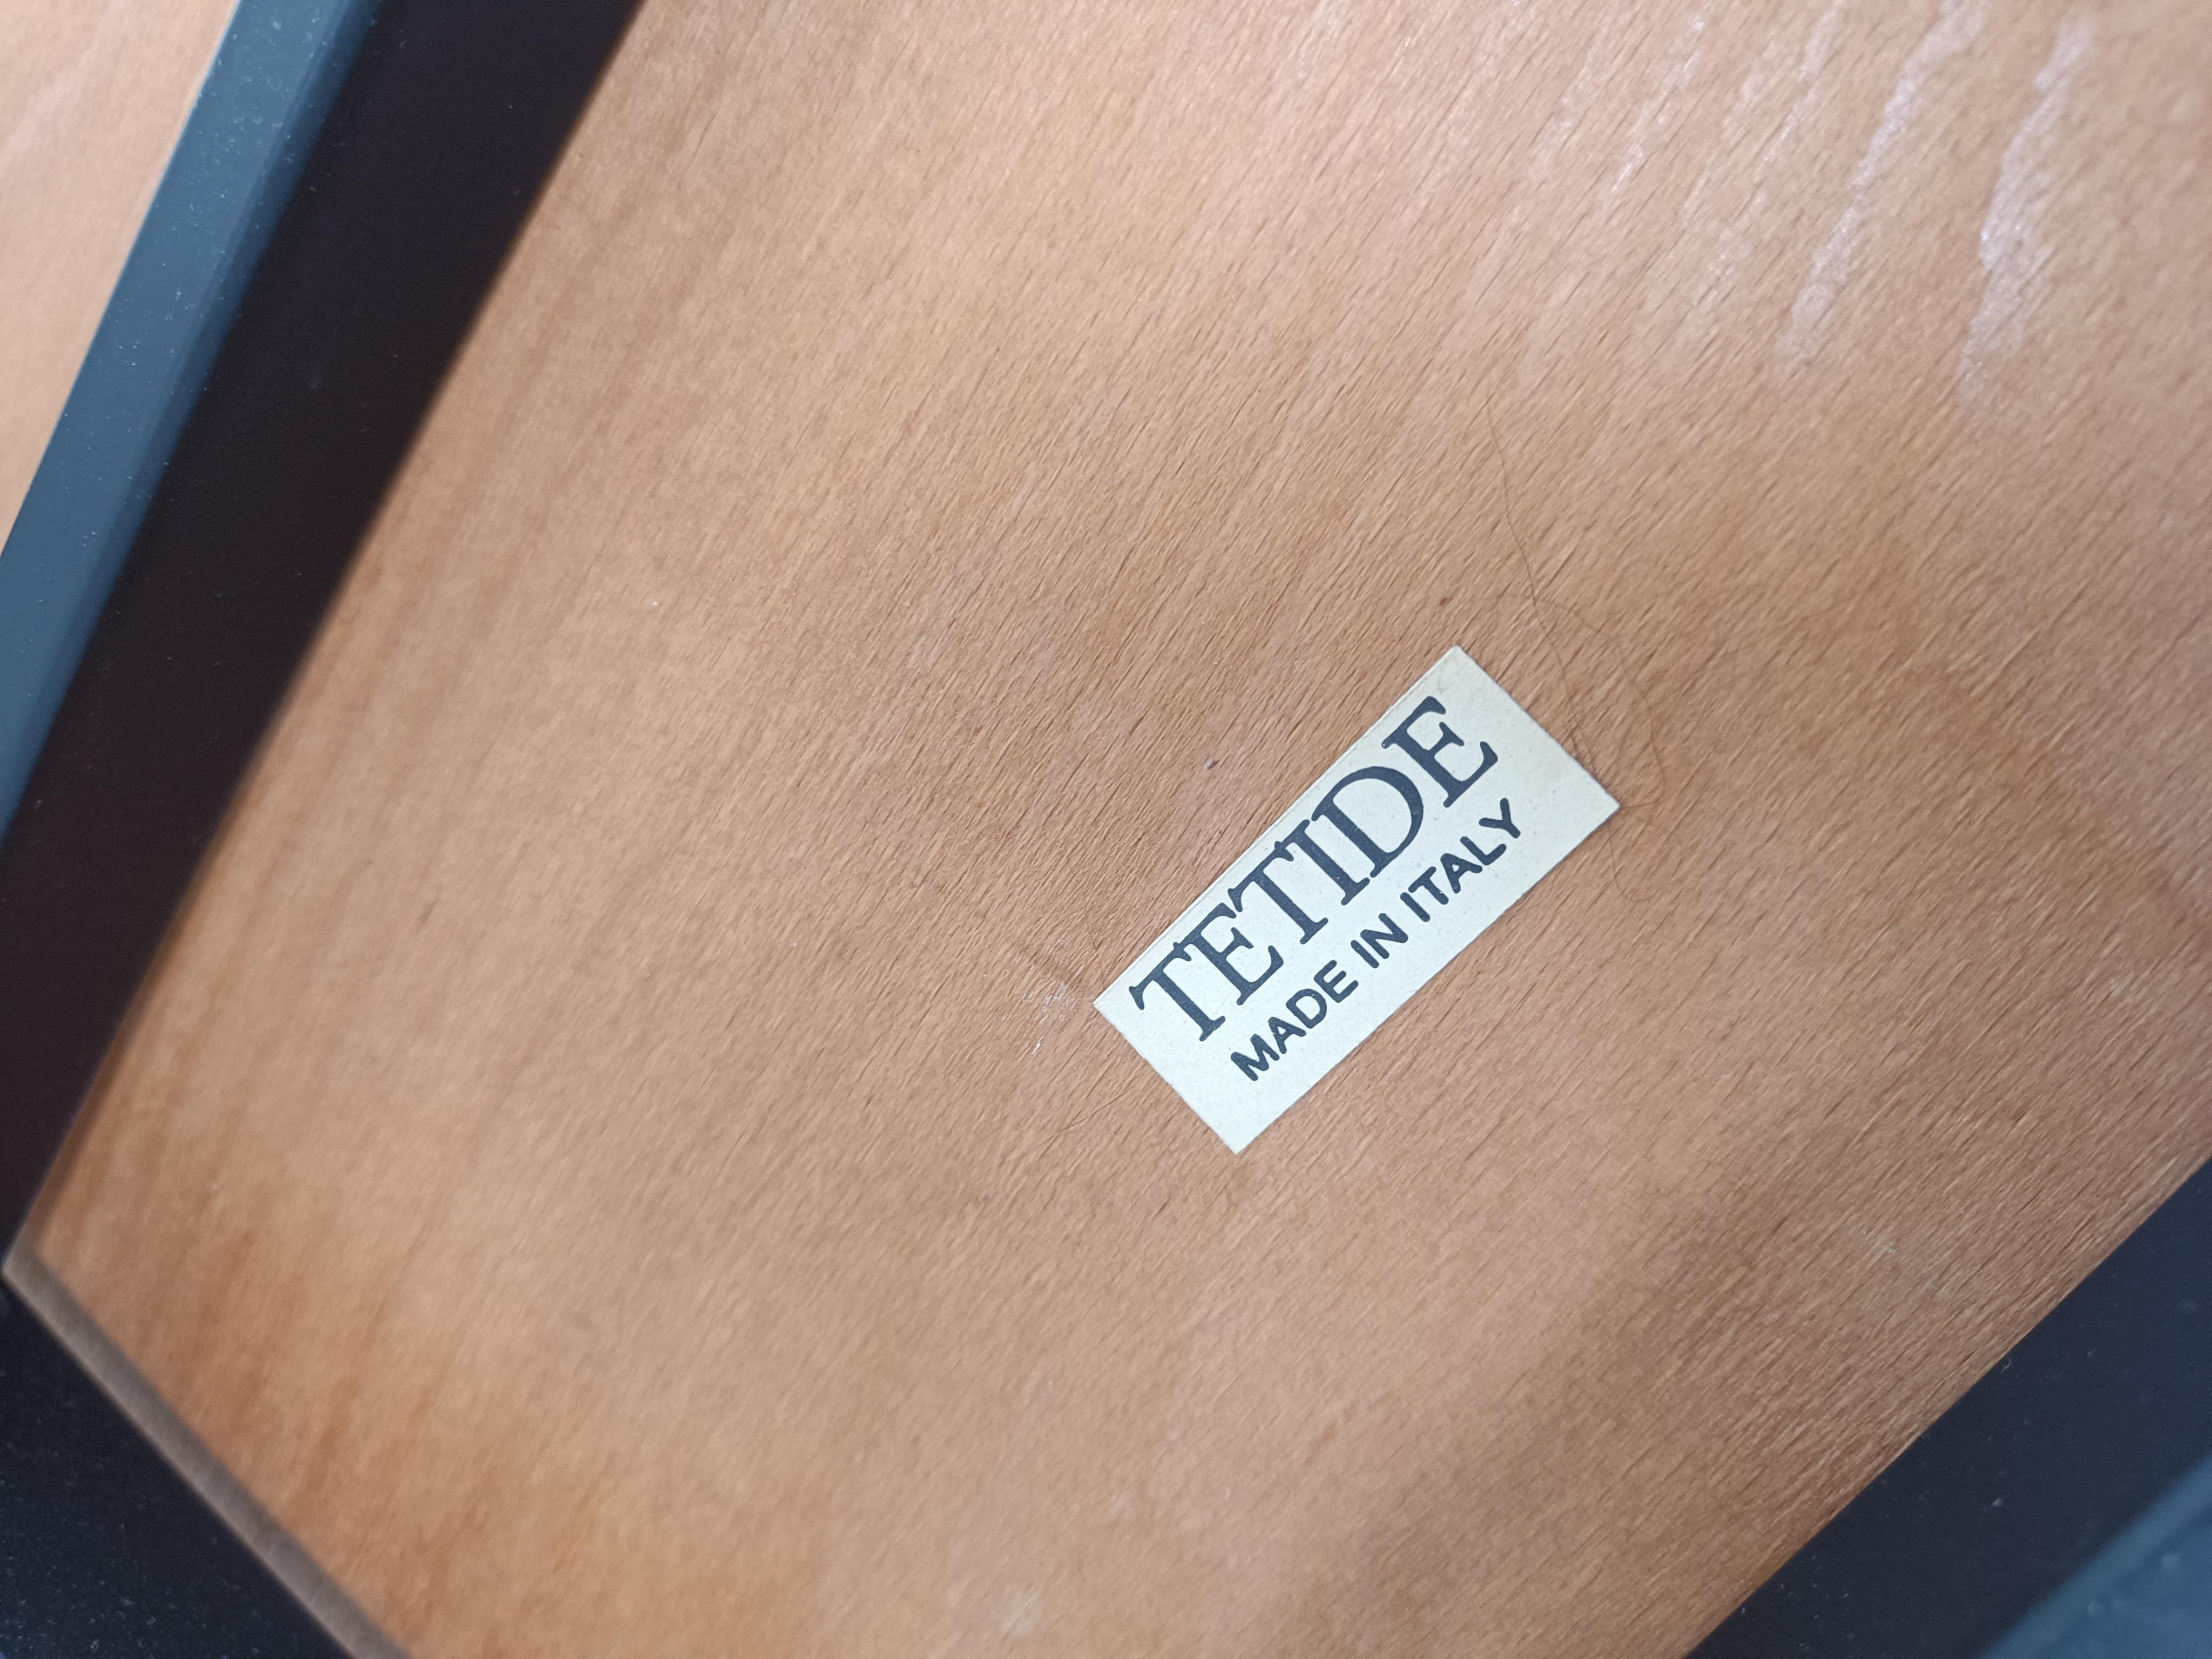 Set of 4 post modern dining chairs produced by Tetide.

Nice sleek design with a black metal frame, perforated backrest and wooden seats and armrests.

The chairs are labelled.

Good condition

1980s - Italy

Dimensions:
Height: 75cm/29.52